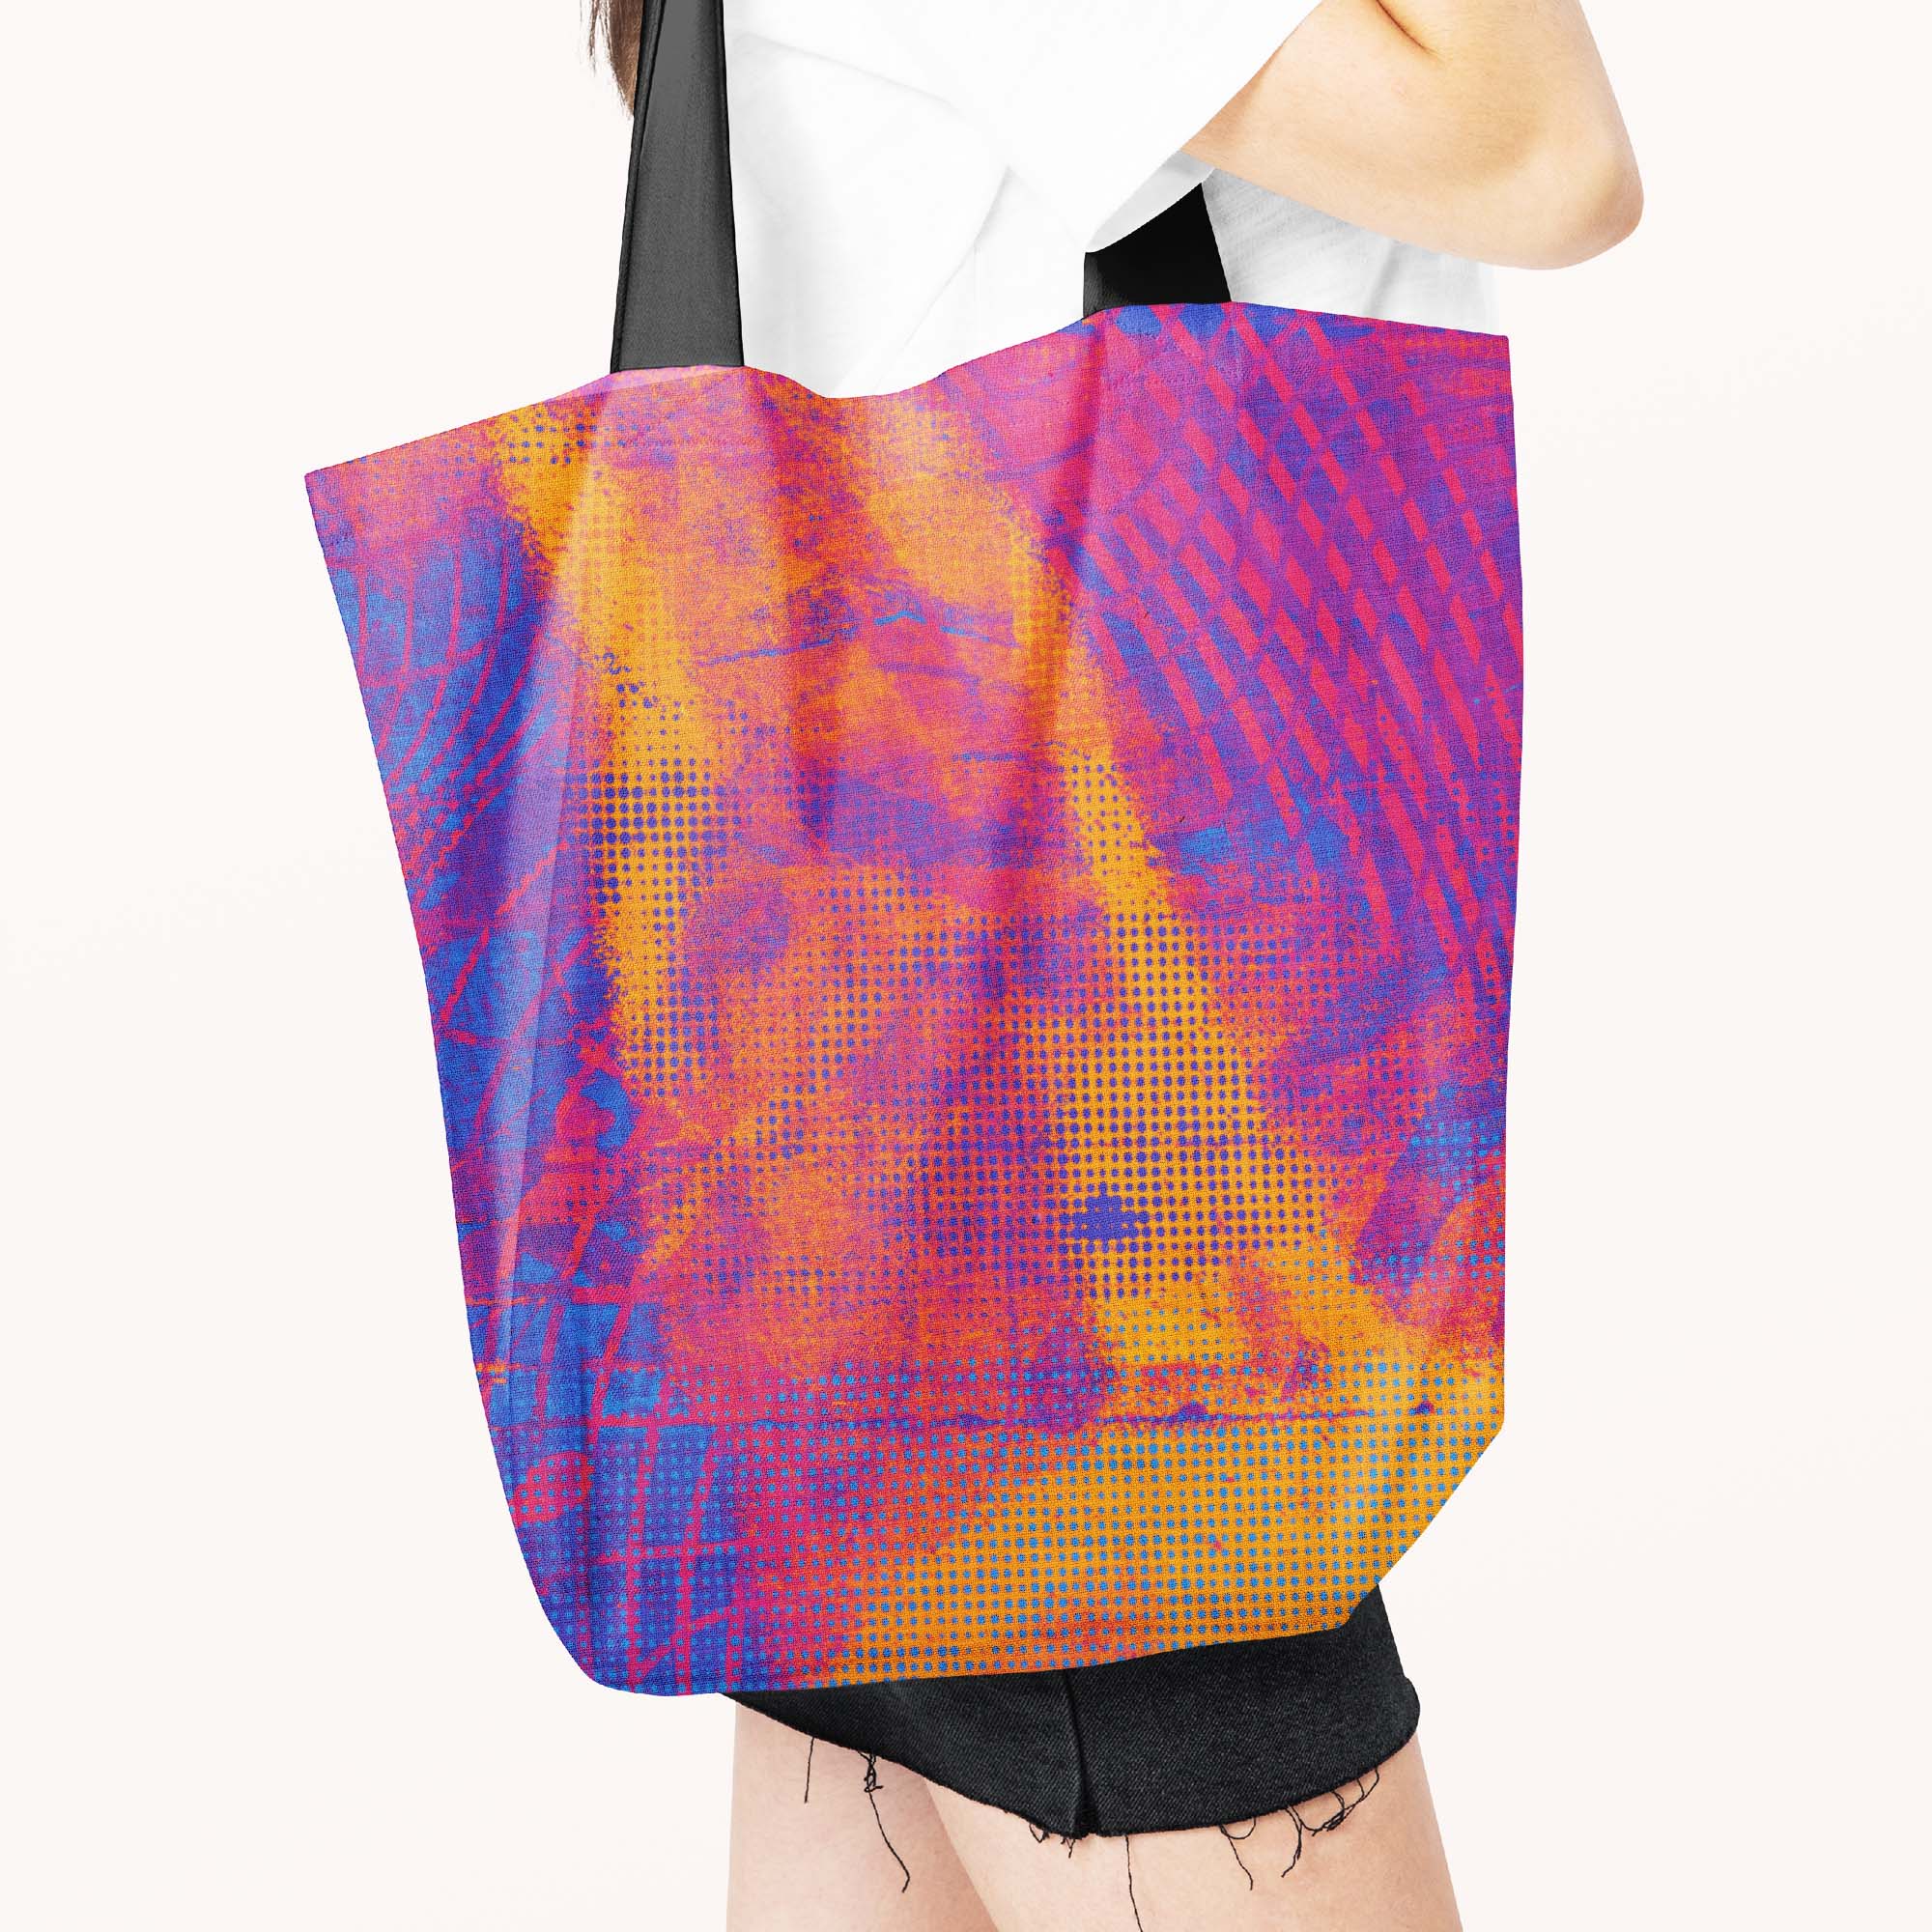 Psychedelic Grunge Tote